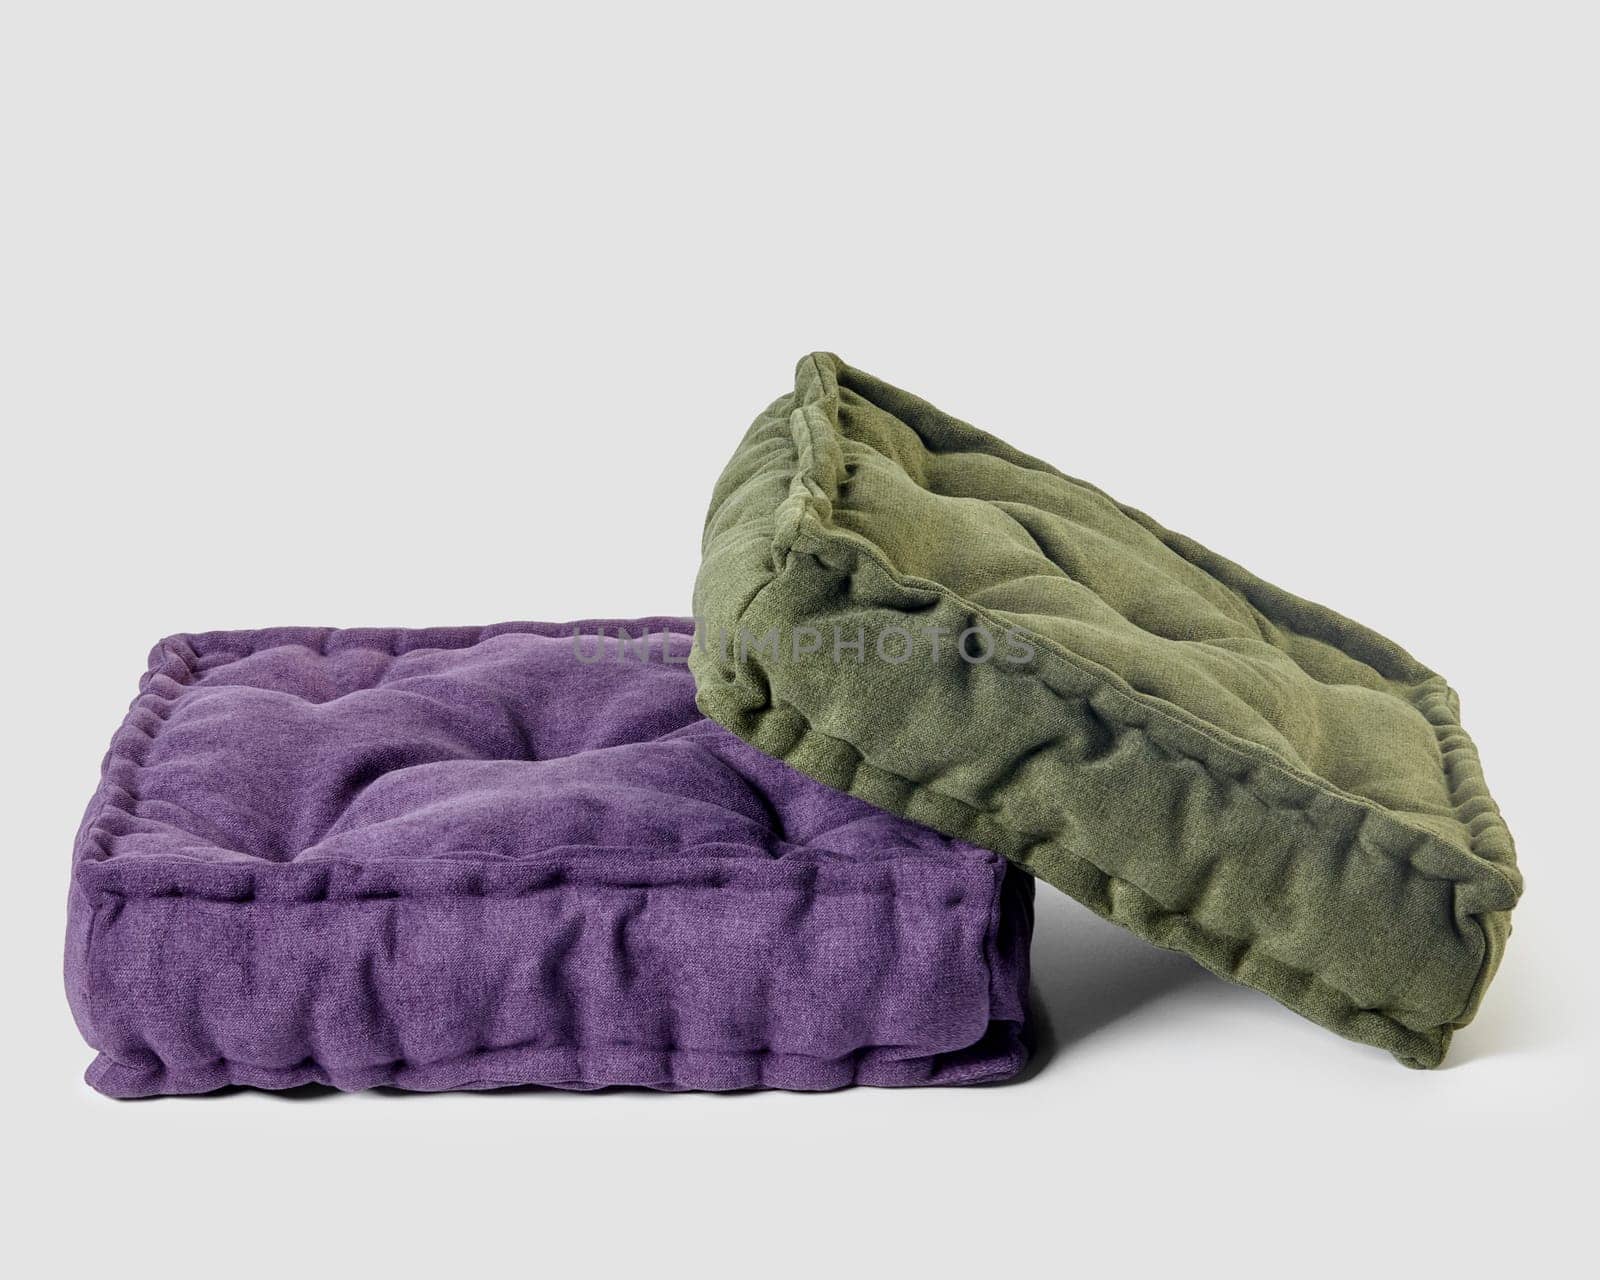 Two plush linen floor cushions in complementary purple and green shades on white background, offering blend of functional comfort and stylish home decor. Handmade furnishing accessories